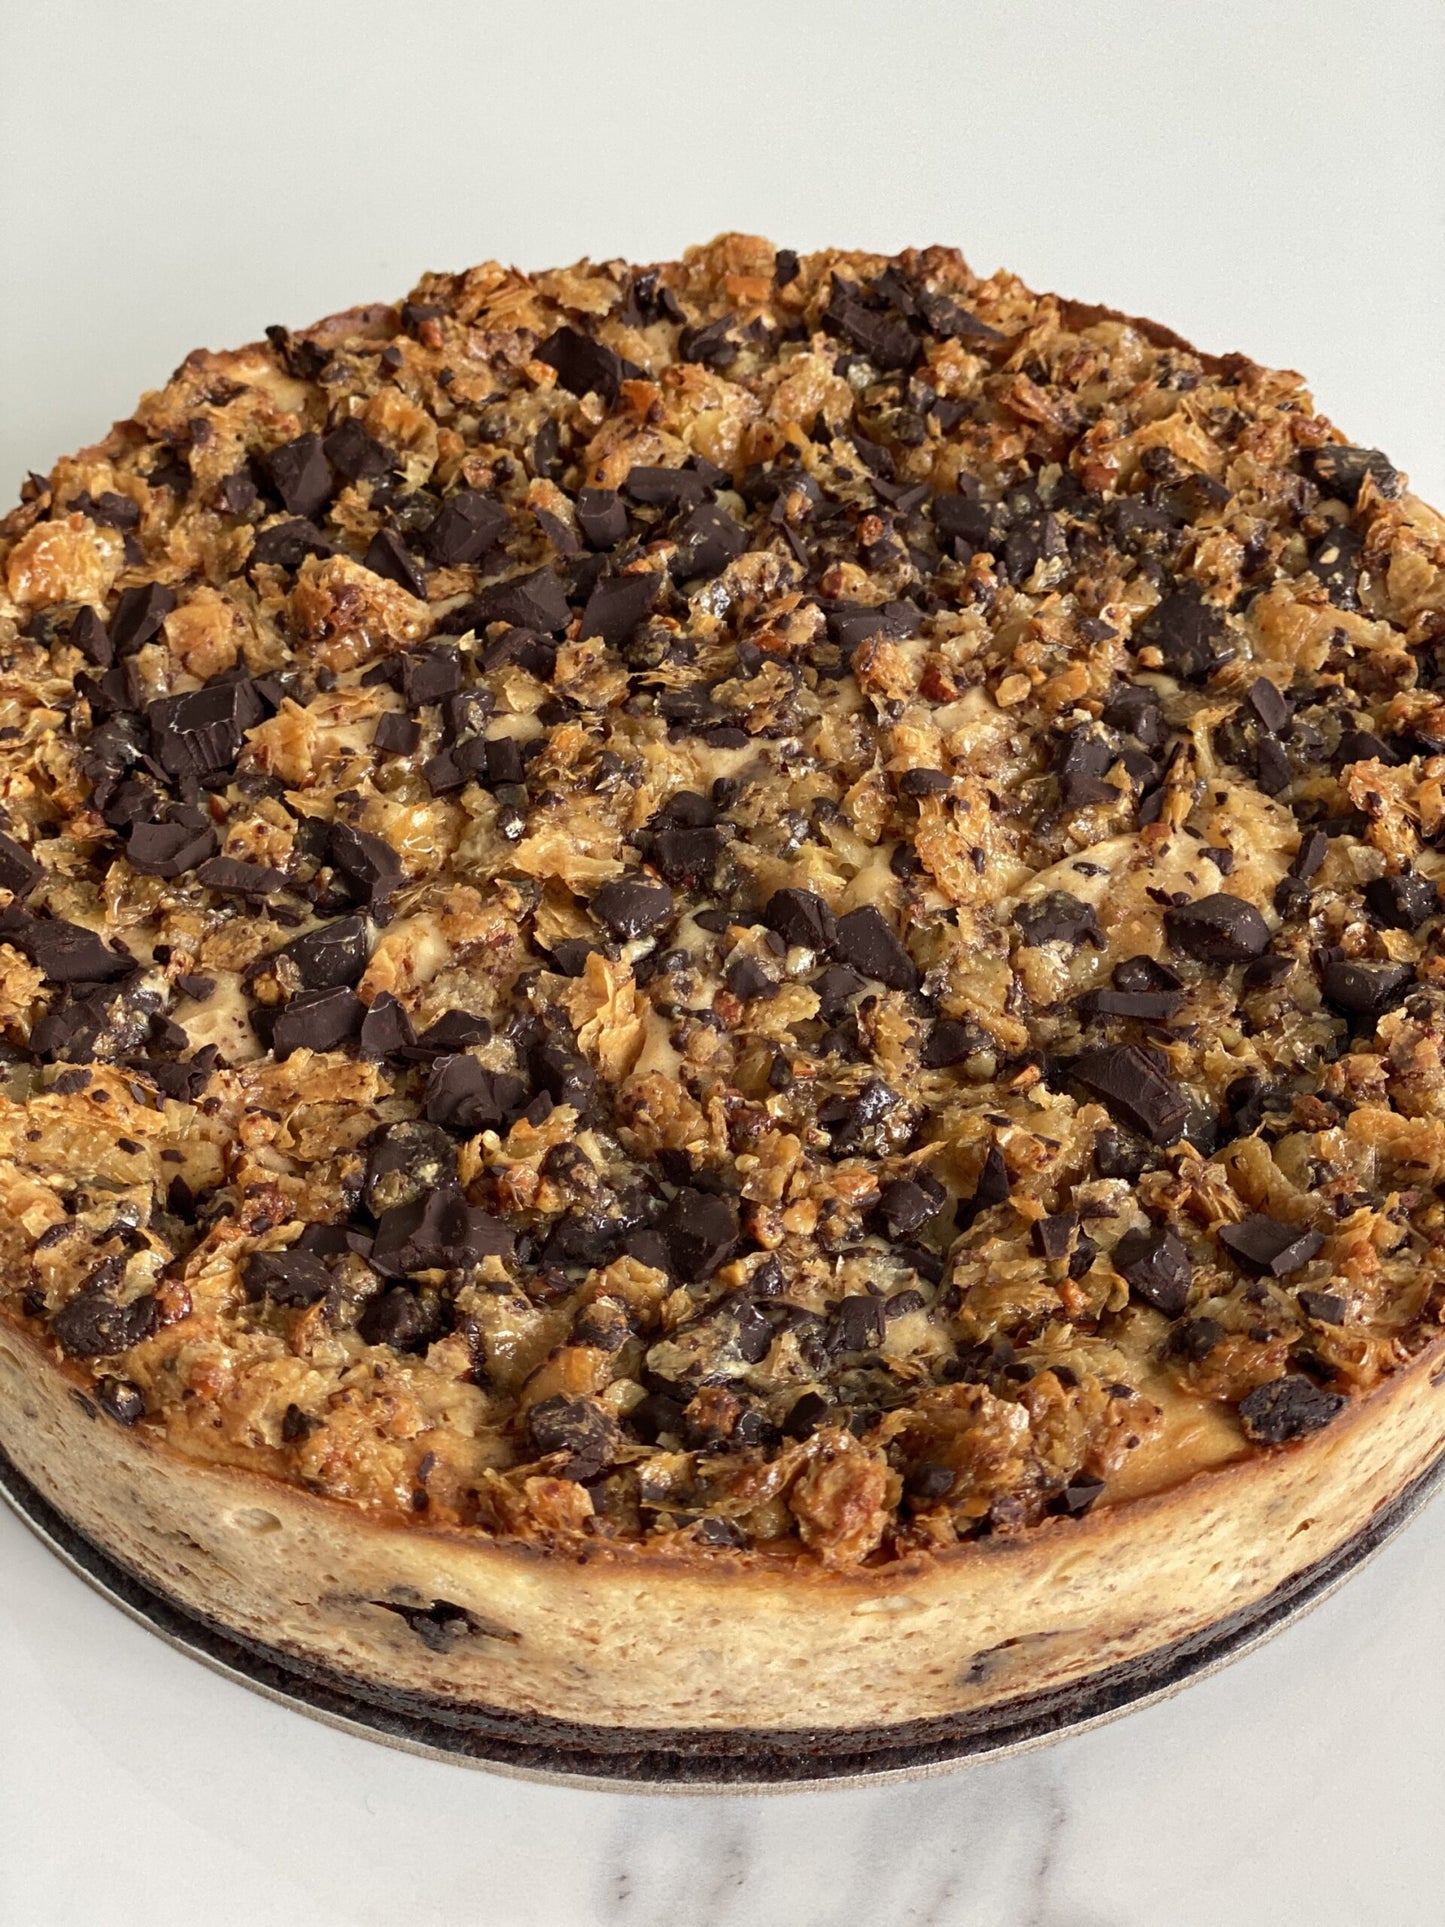 a whole chocolate and baklava cheesecake